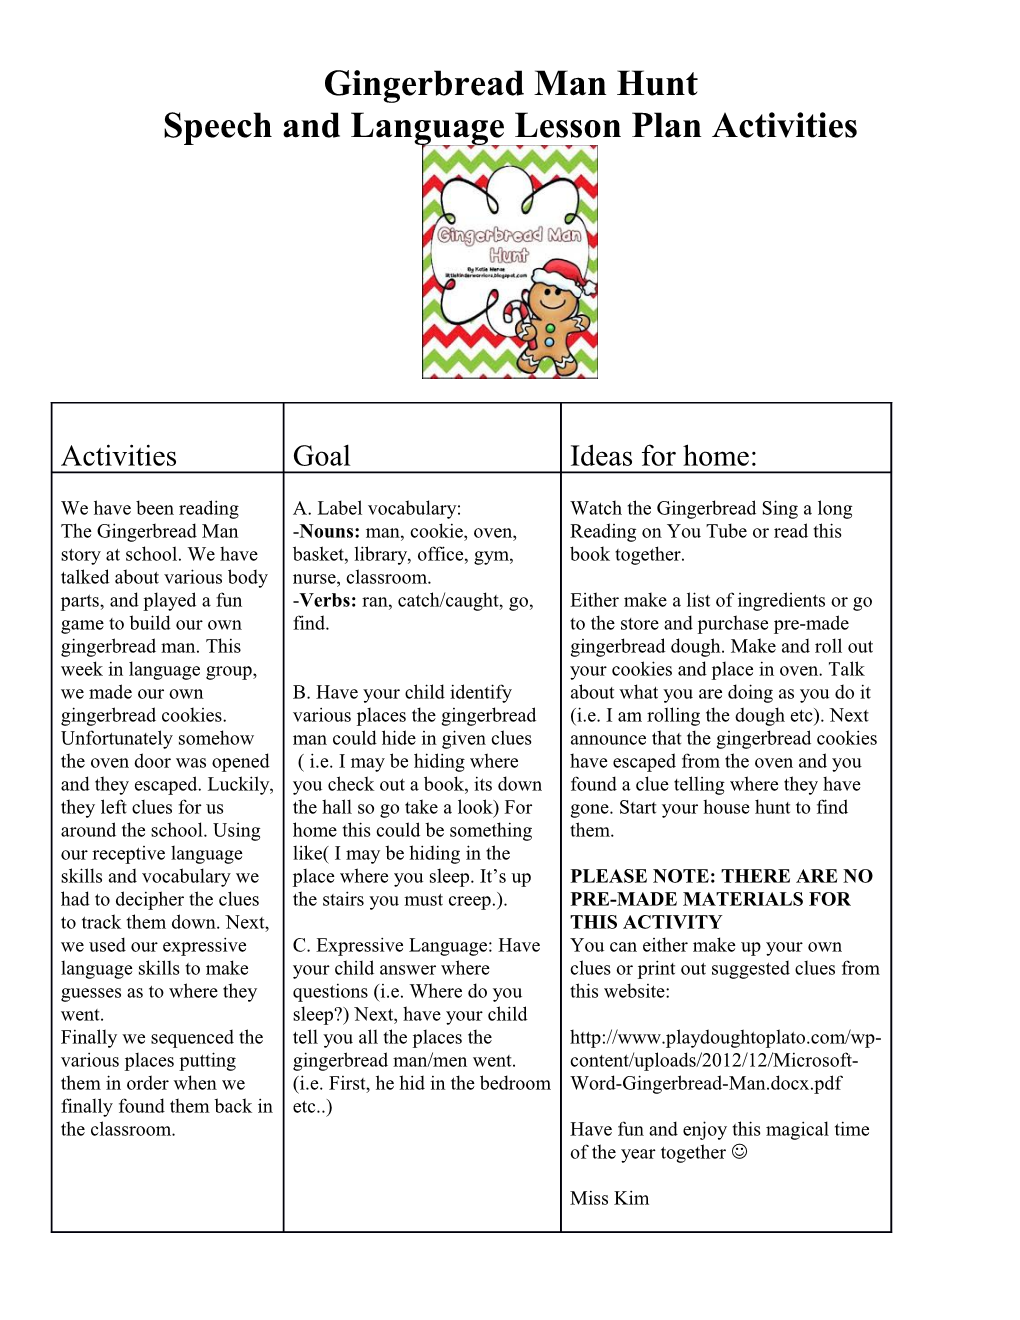 Speech and Language Lesson Plan Activities